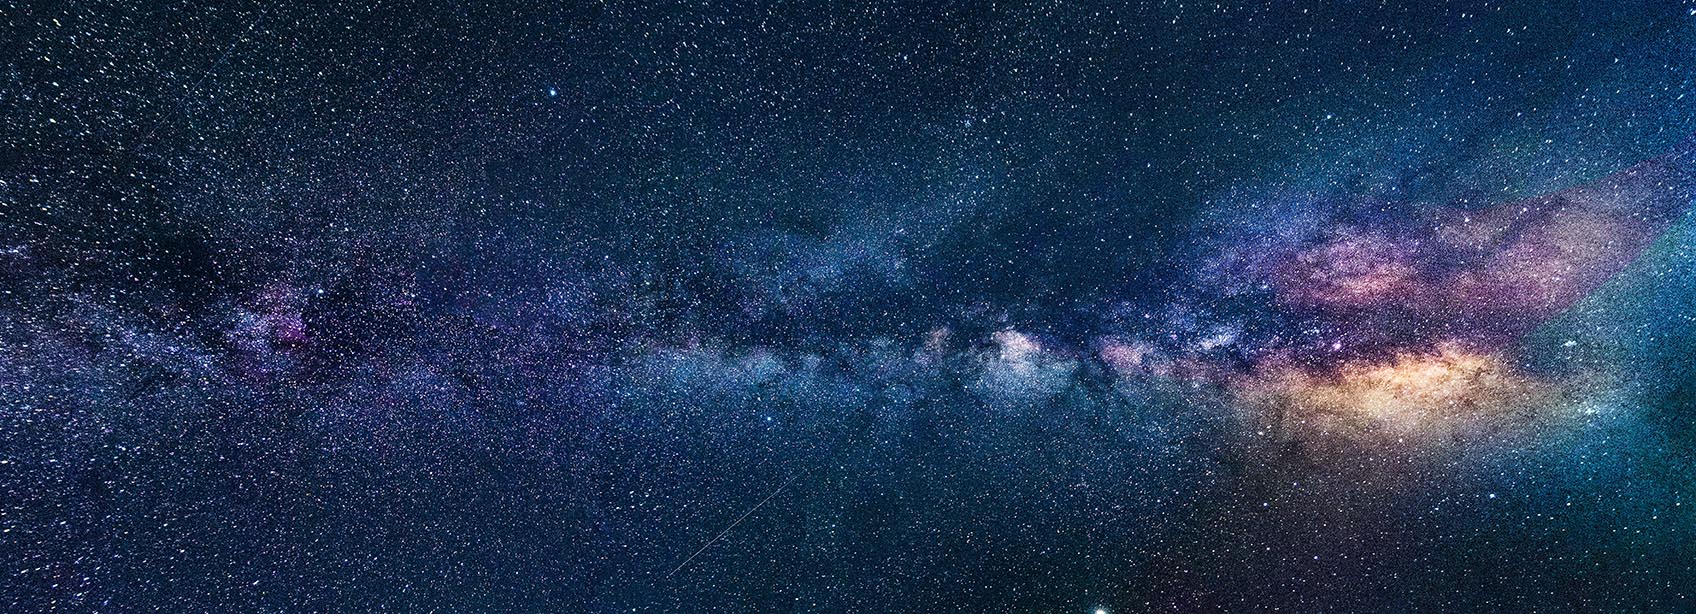 Wex Blog Tips and Tricks Astrophotography